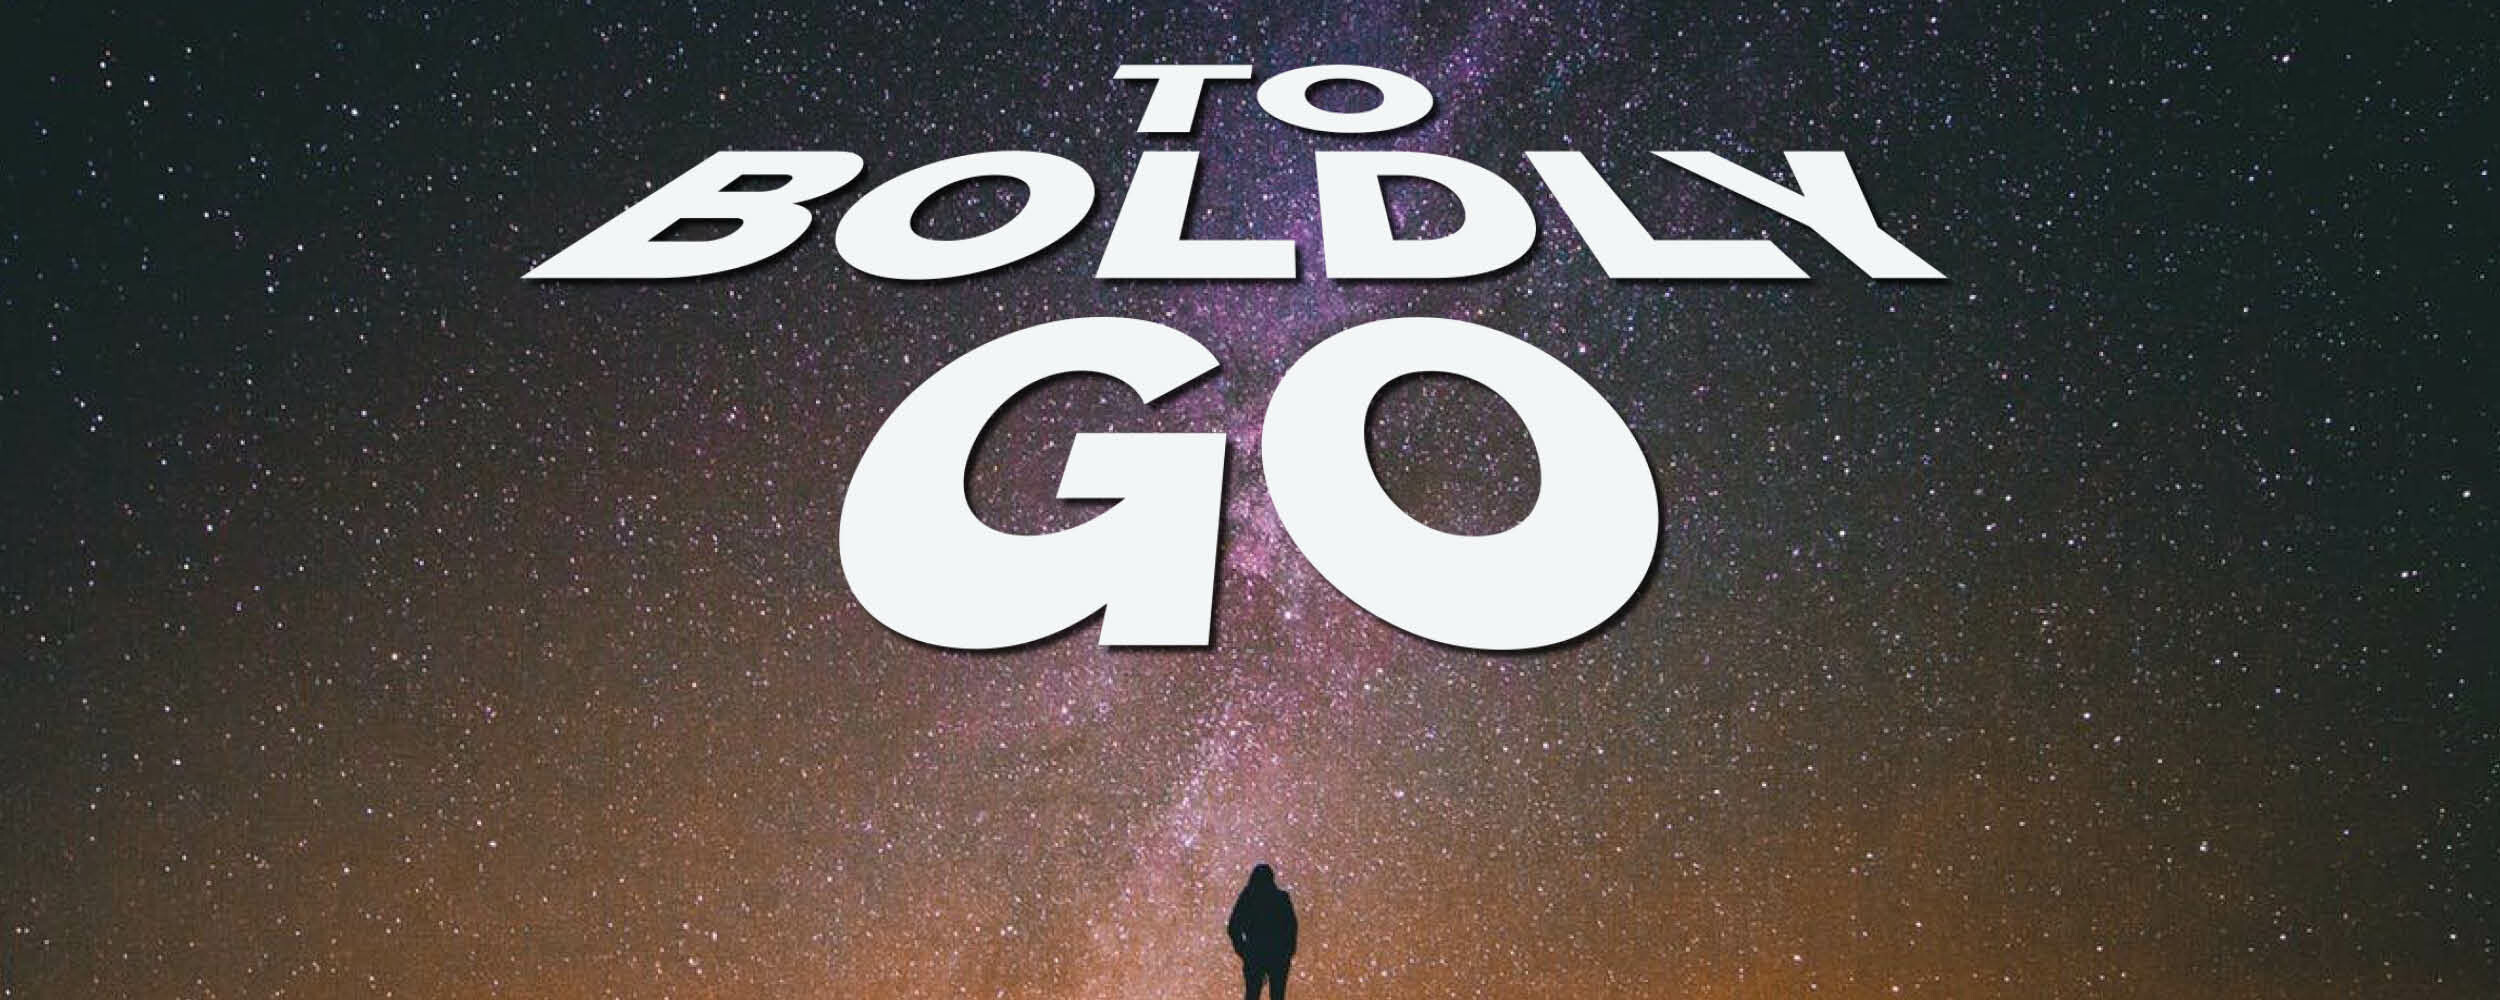 To Boldly Go, Children's Message